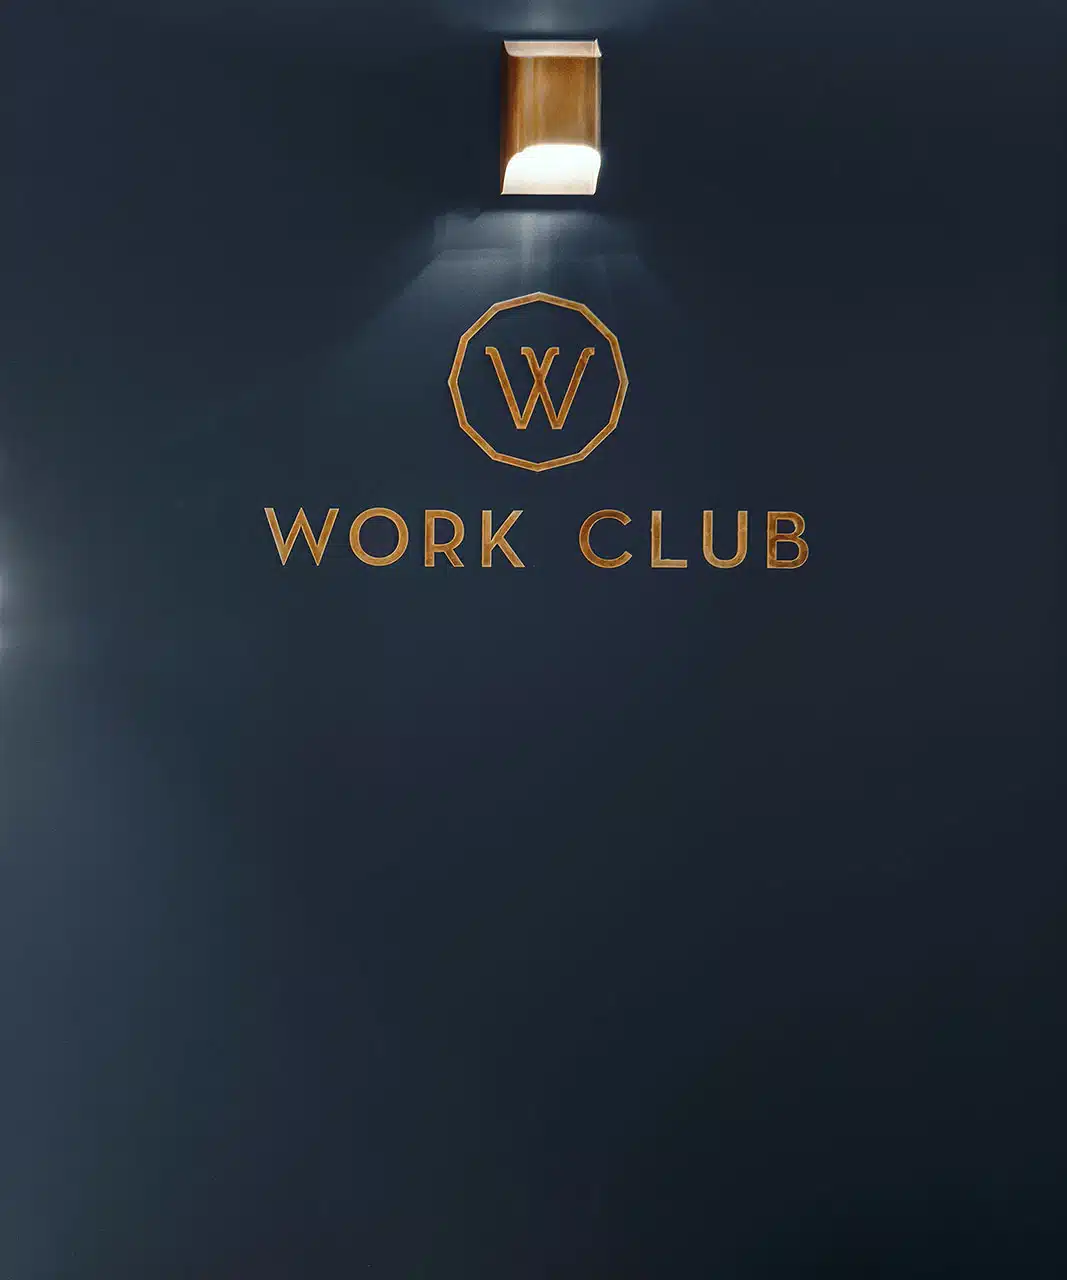 Work Club sign illuminated by down light